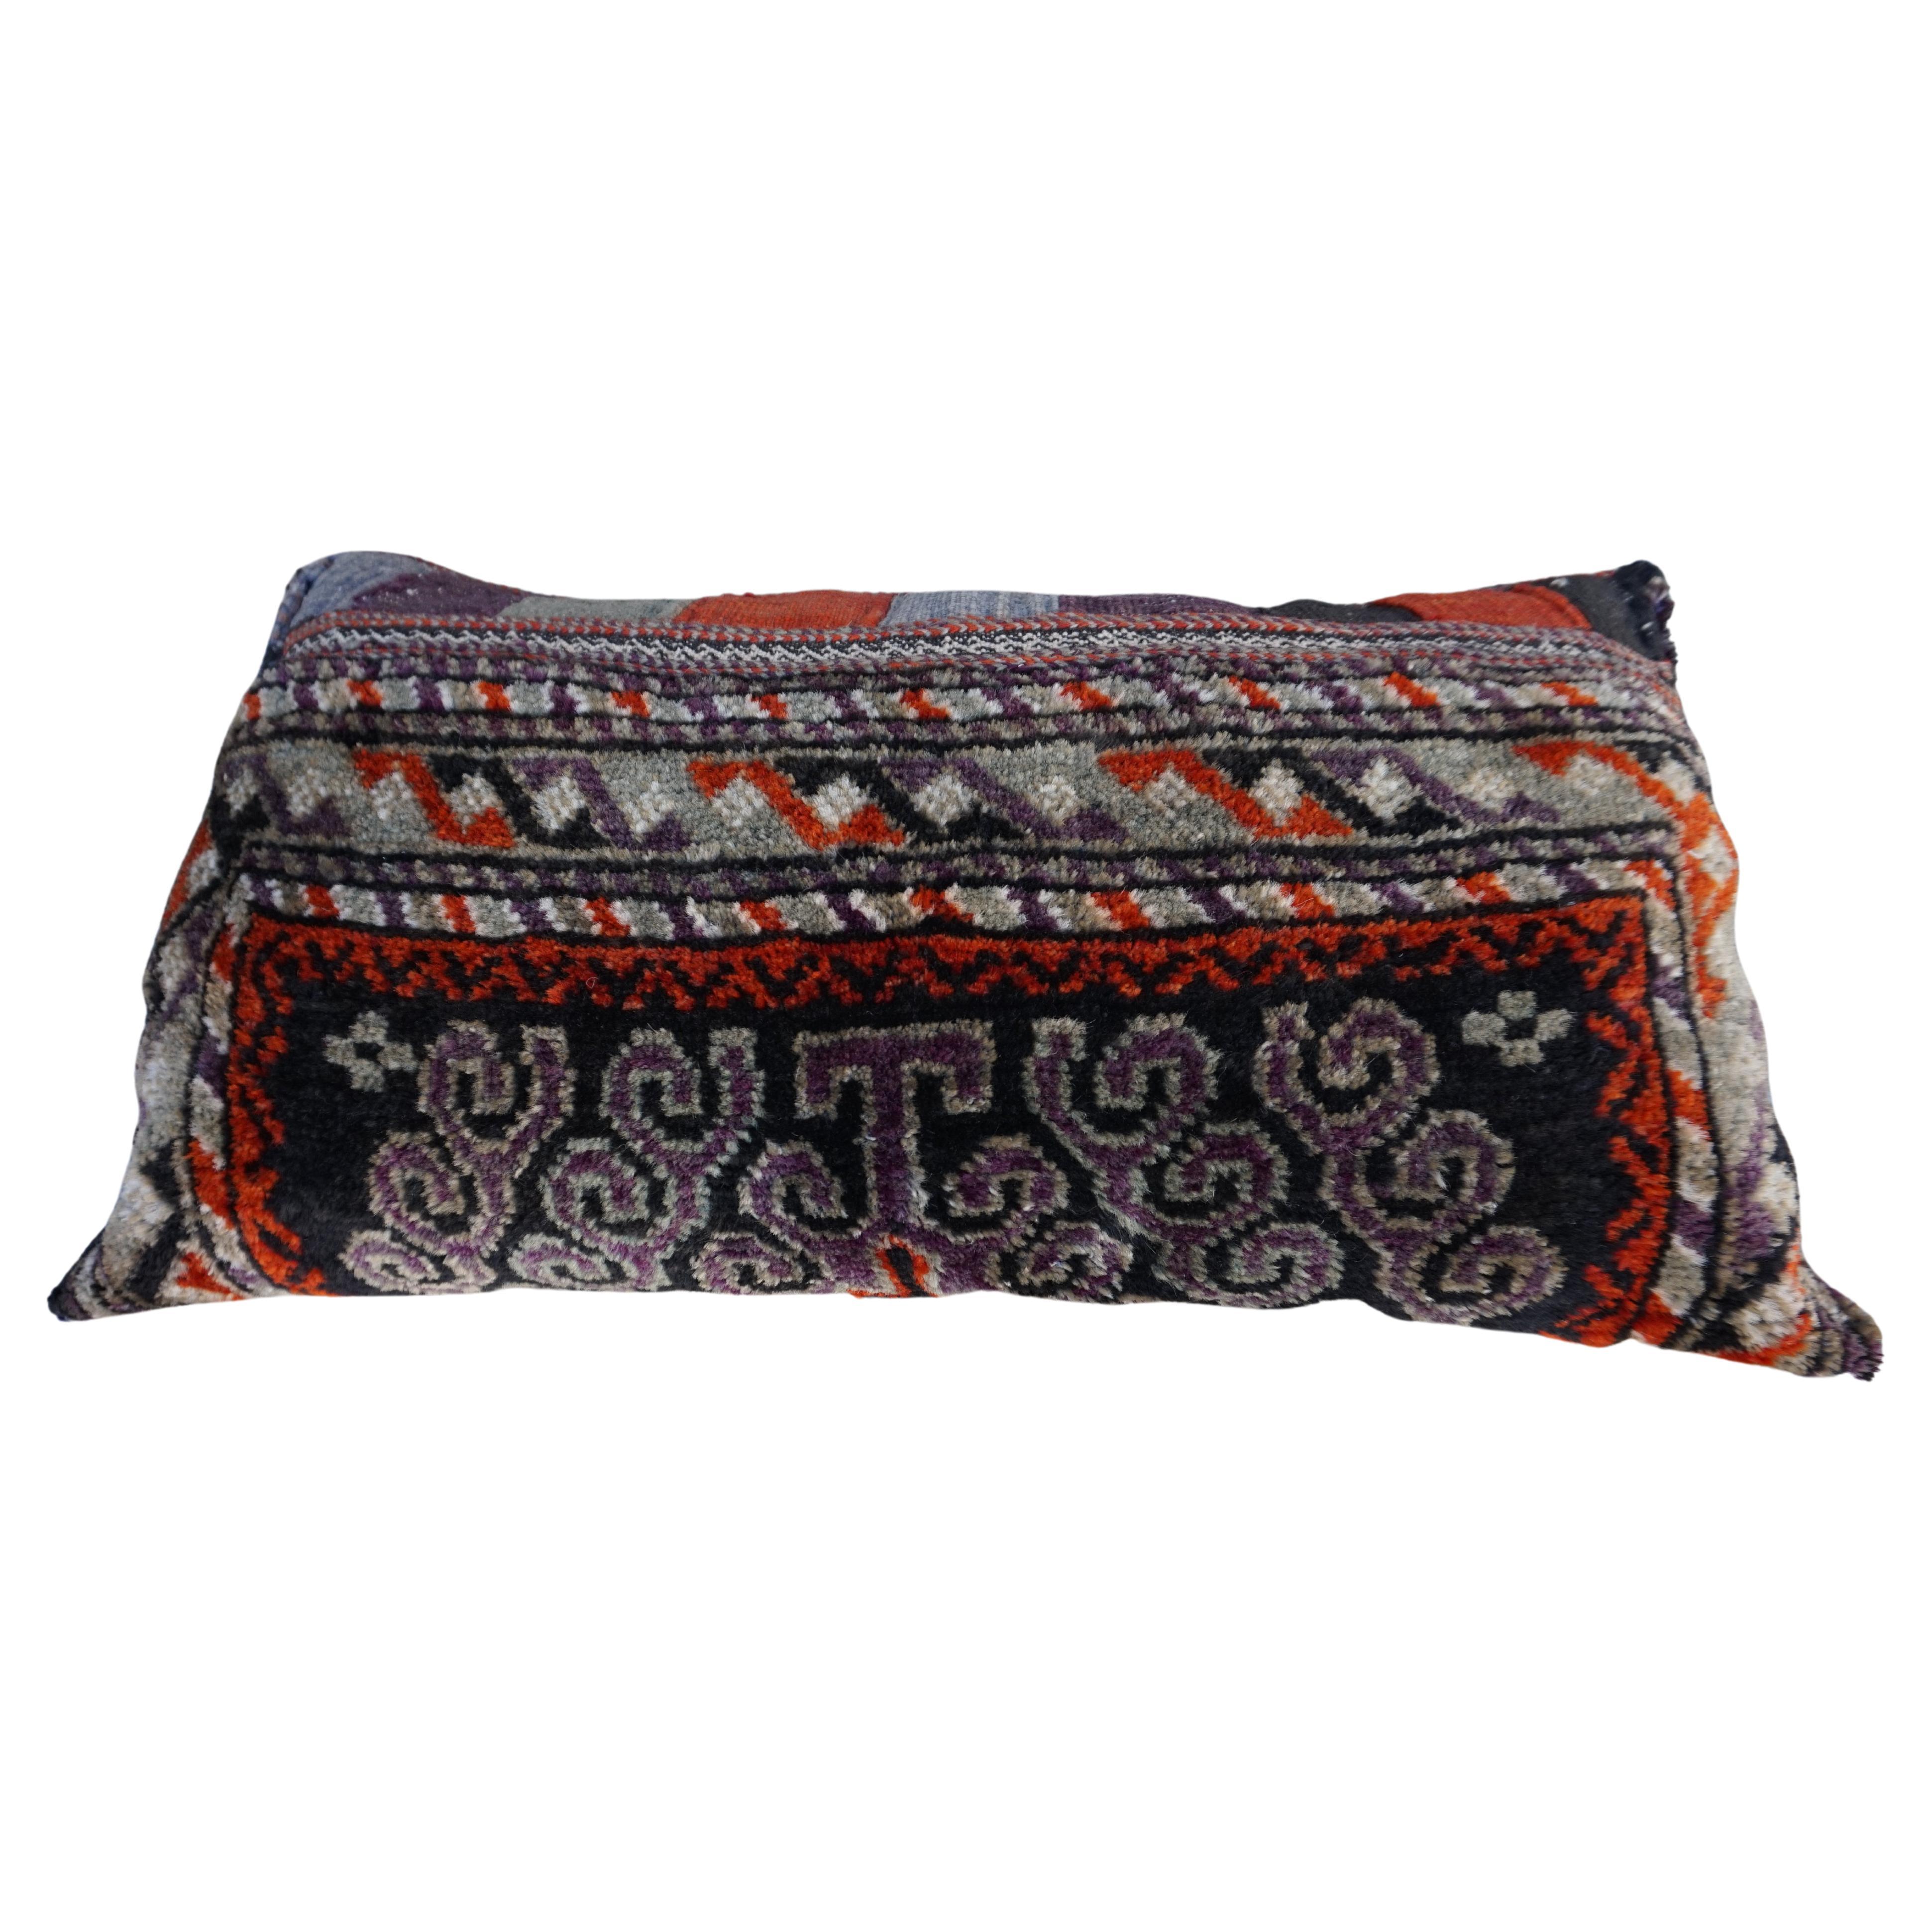 Rustic Hand-Knotted Wool Cushion Pillow with Geometric Tribal Patterns For Sale